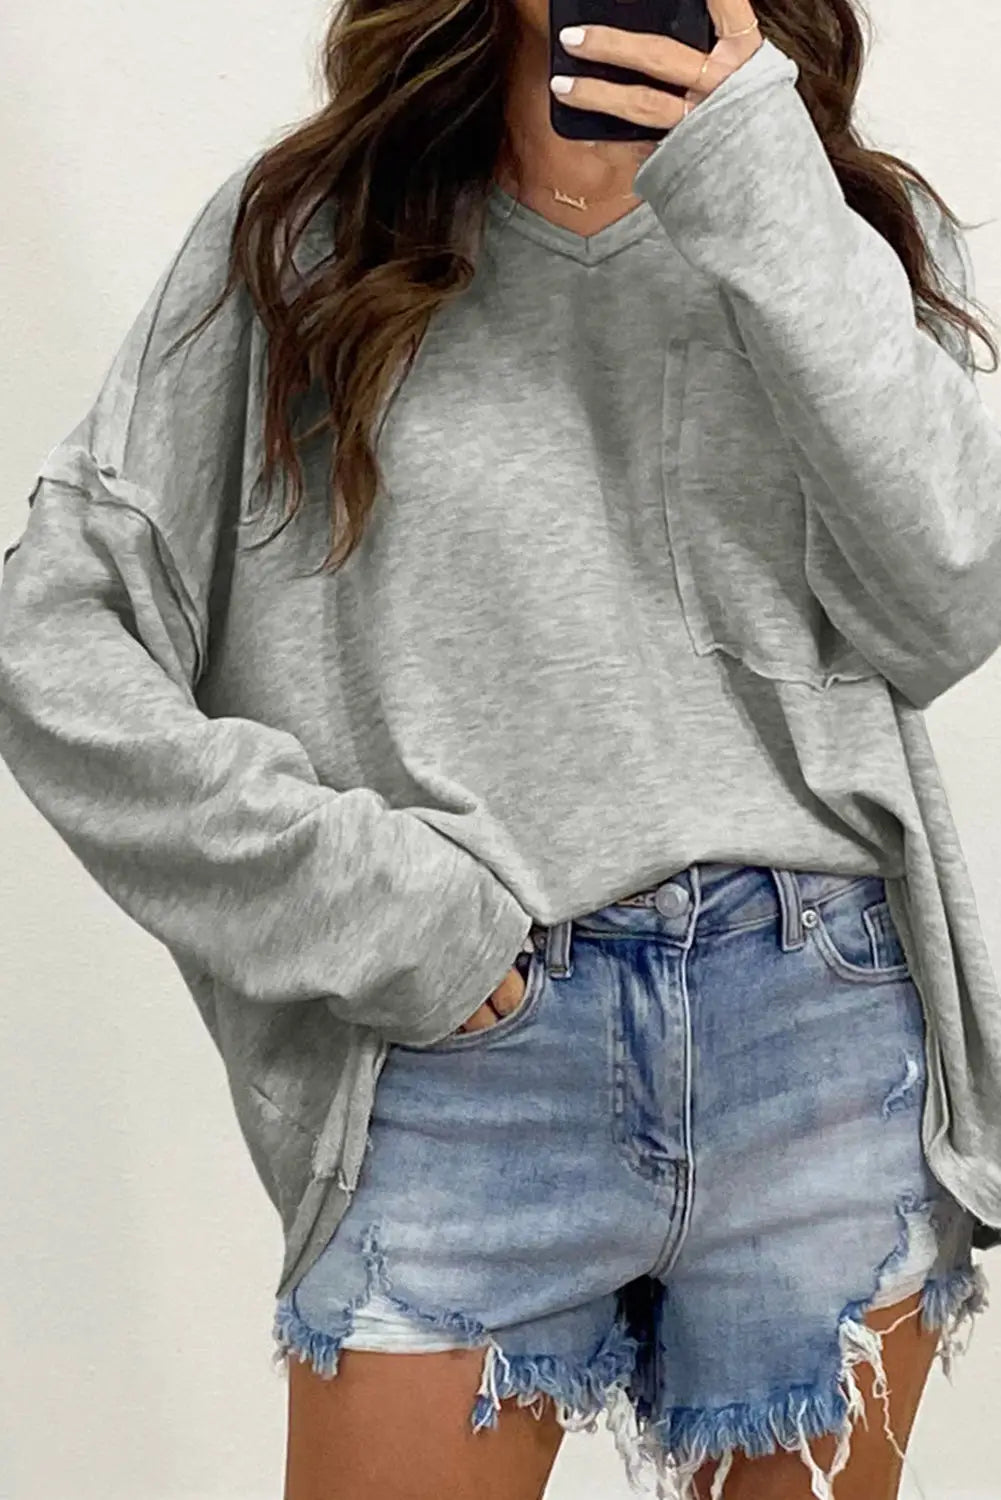 Gray pocketed oversized drop sleeve top - s / 60% cotton + 35% polyester + 5% elastane - long tops